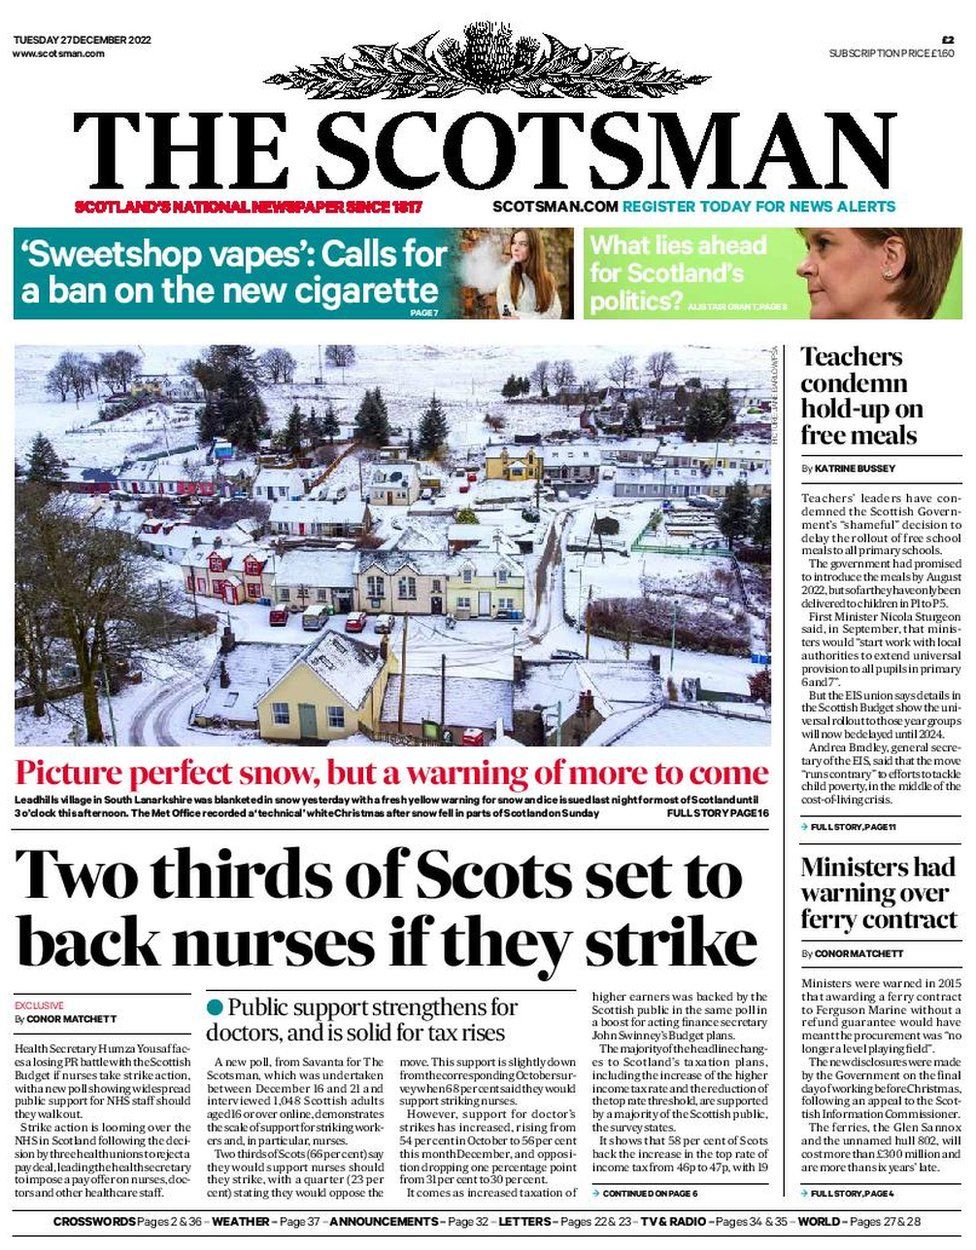 Scotland's papers: Strike support for nurses and Christmas A&E delays - BBC  News